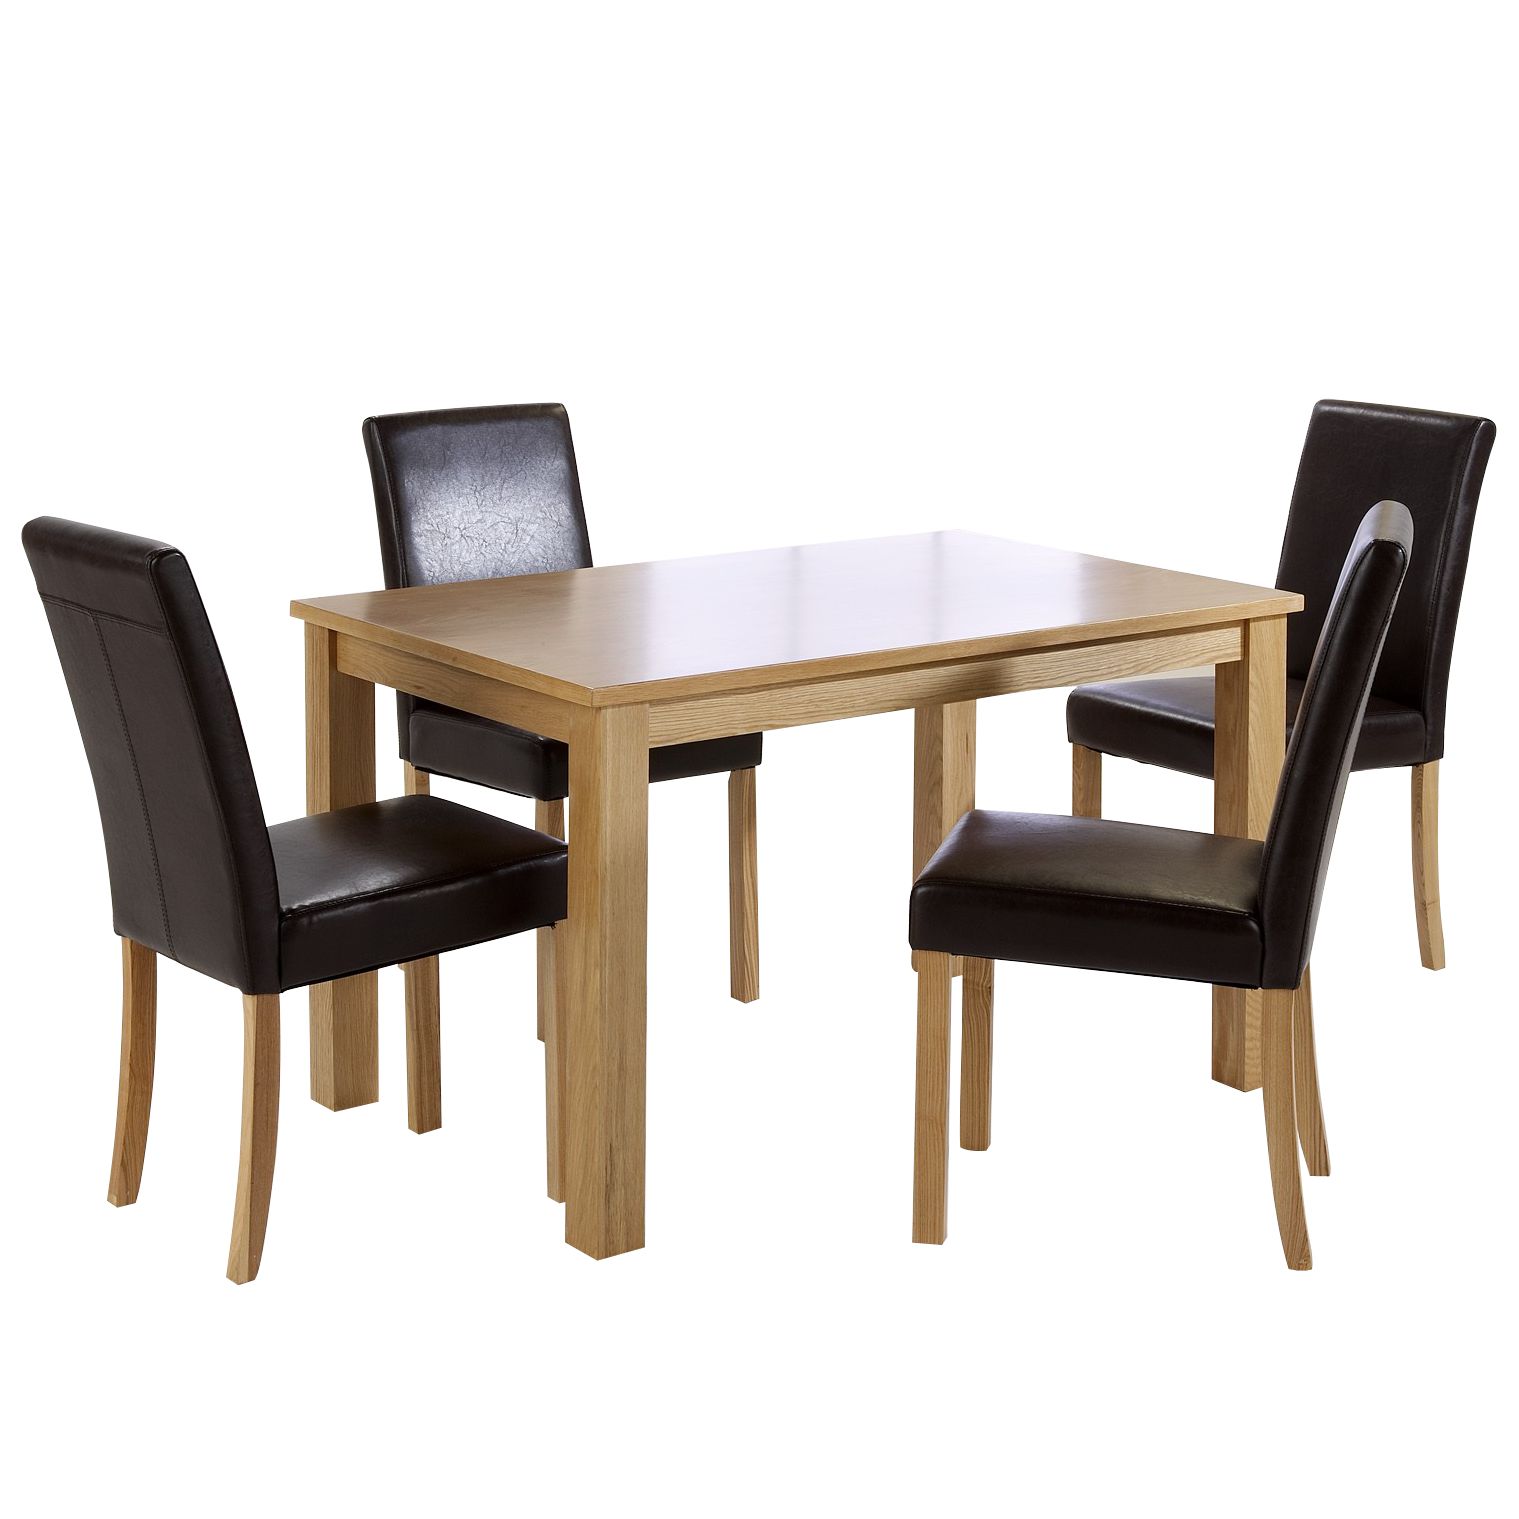 john lewis Linden 4 Seater Dining Table and